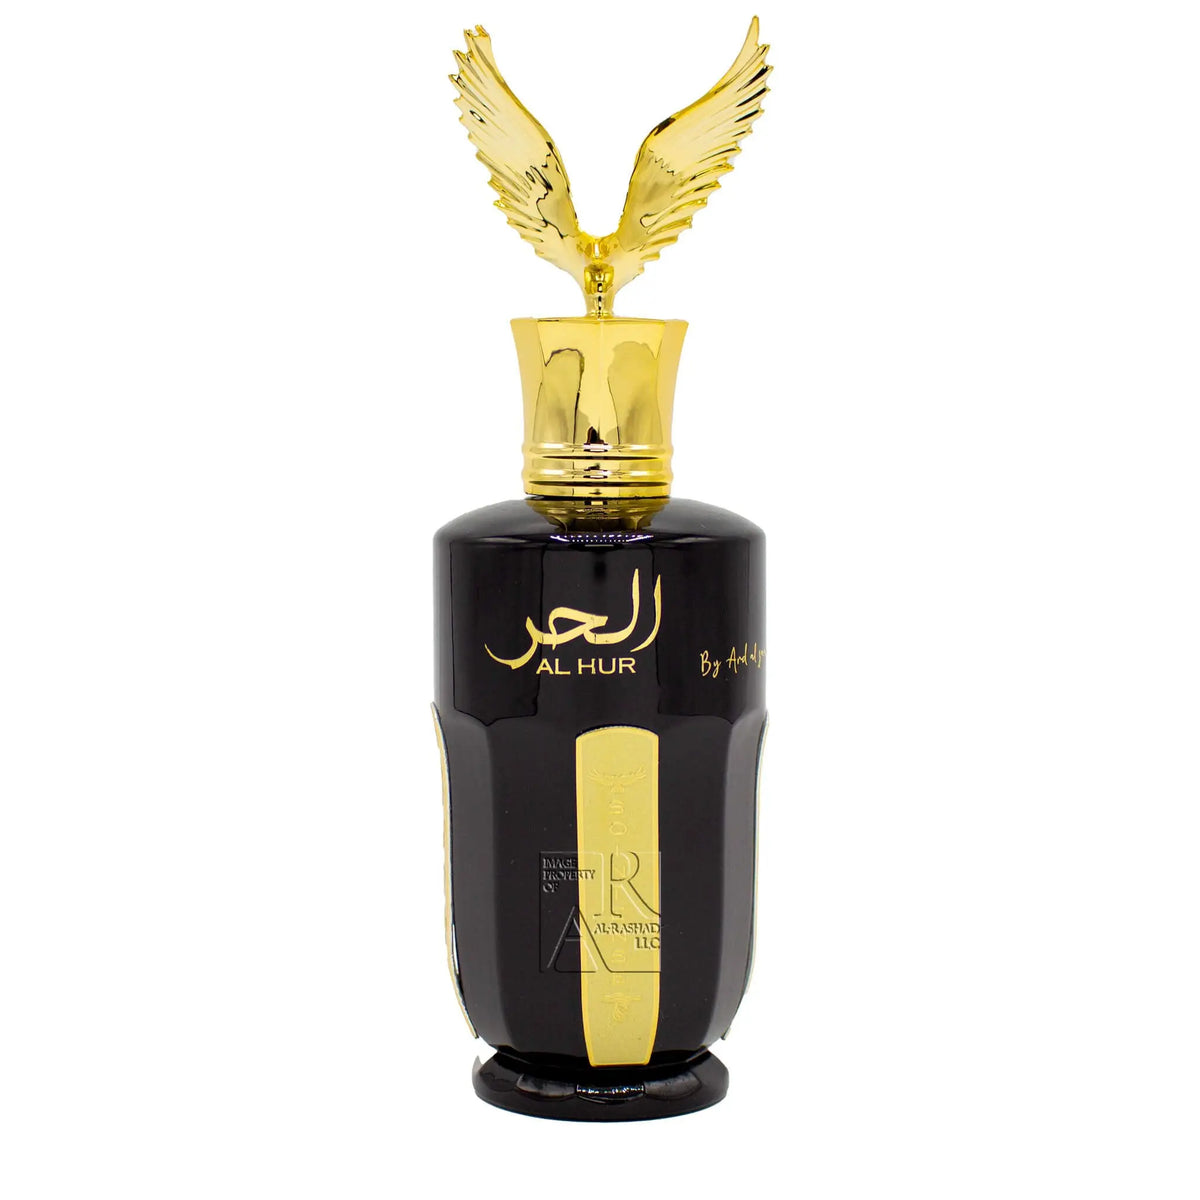 The image displays a perfume bottle with a sleek, glossy black finish and a golden cap featuring two extended wings. The cap and wings have a polished, metallic sheen, suggesting a luxurious feel. On the front of the bottle, there is elegant gold script, possibly Arabic, with the words "AL HUR" written below it, suggesting it is the name of the fragrance or brand, along with a vertical, golden label